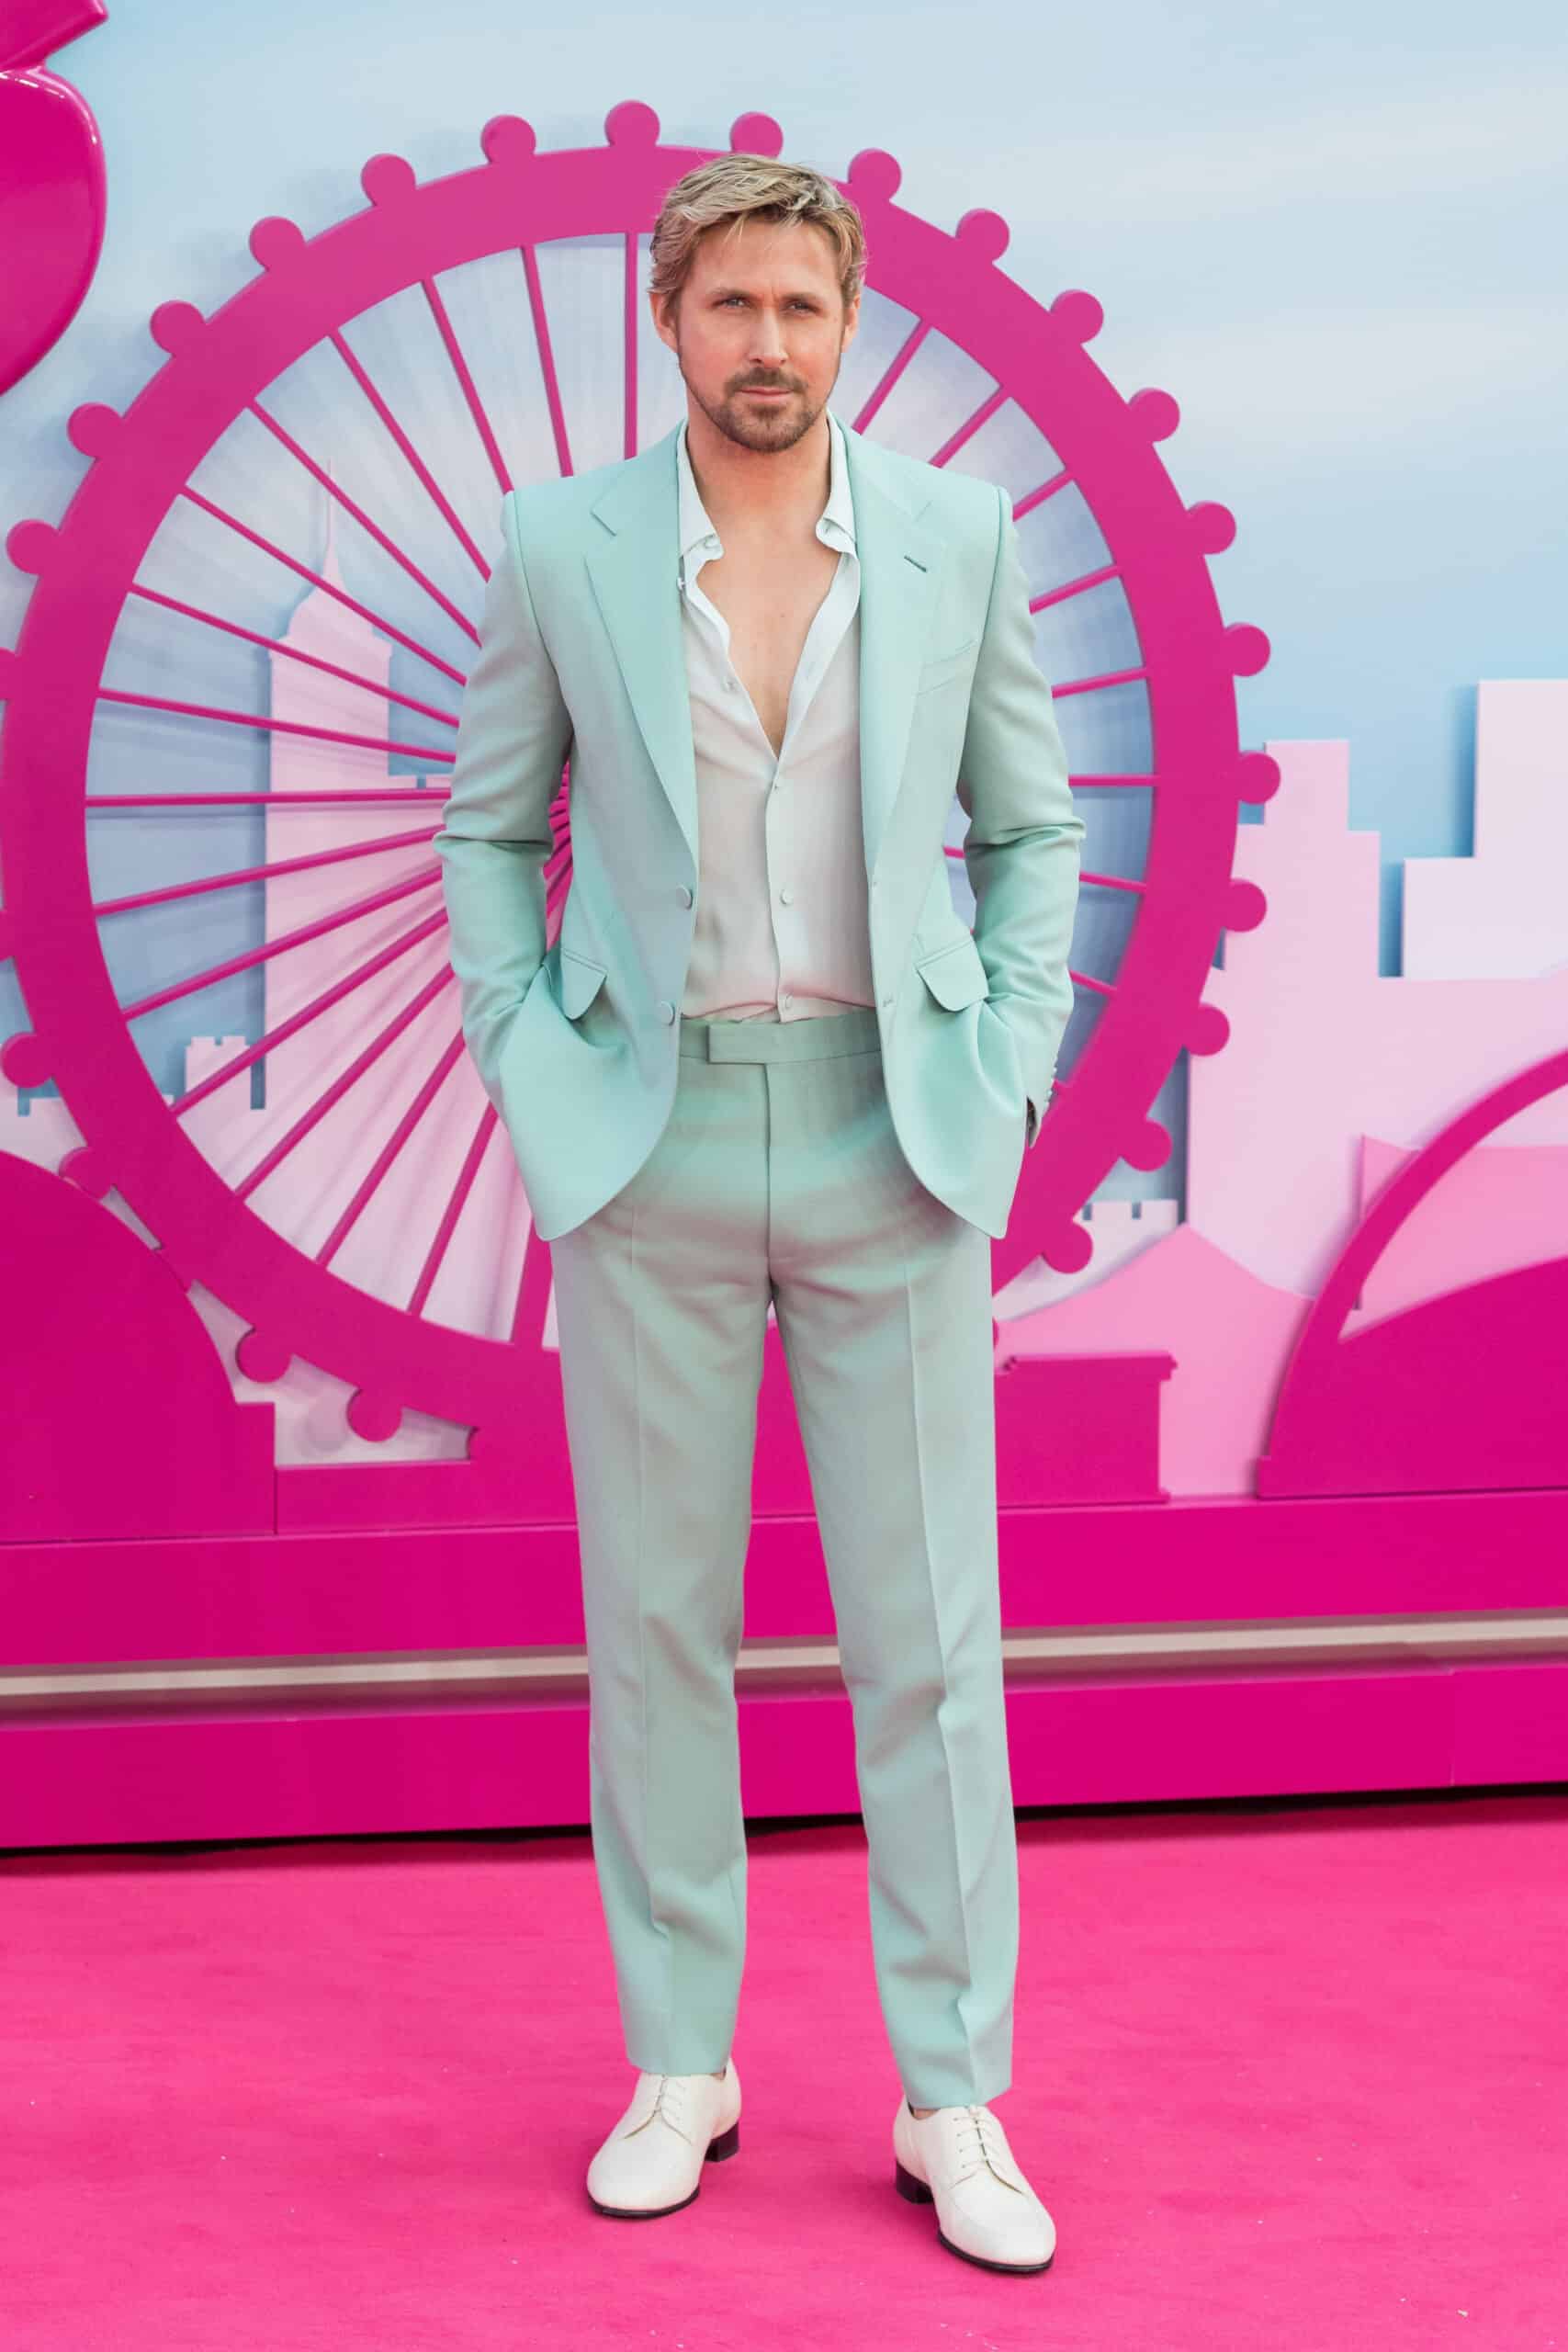 LONDON, UNITED KINGDOM - JULY 12: Ryan Gosling attends the European premiere of 'Barbie' at the Cineworld Leicester Square in London, United Kingdom on July 12, 2023.